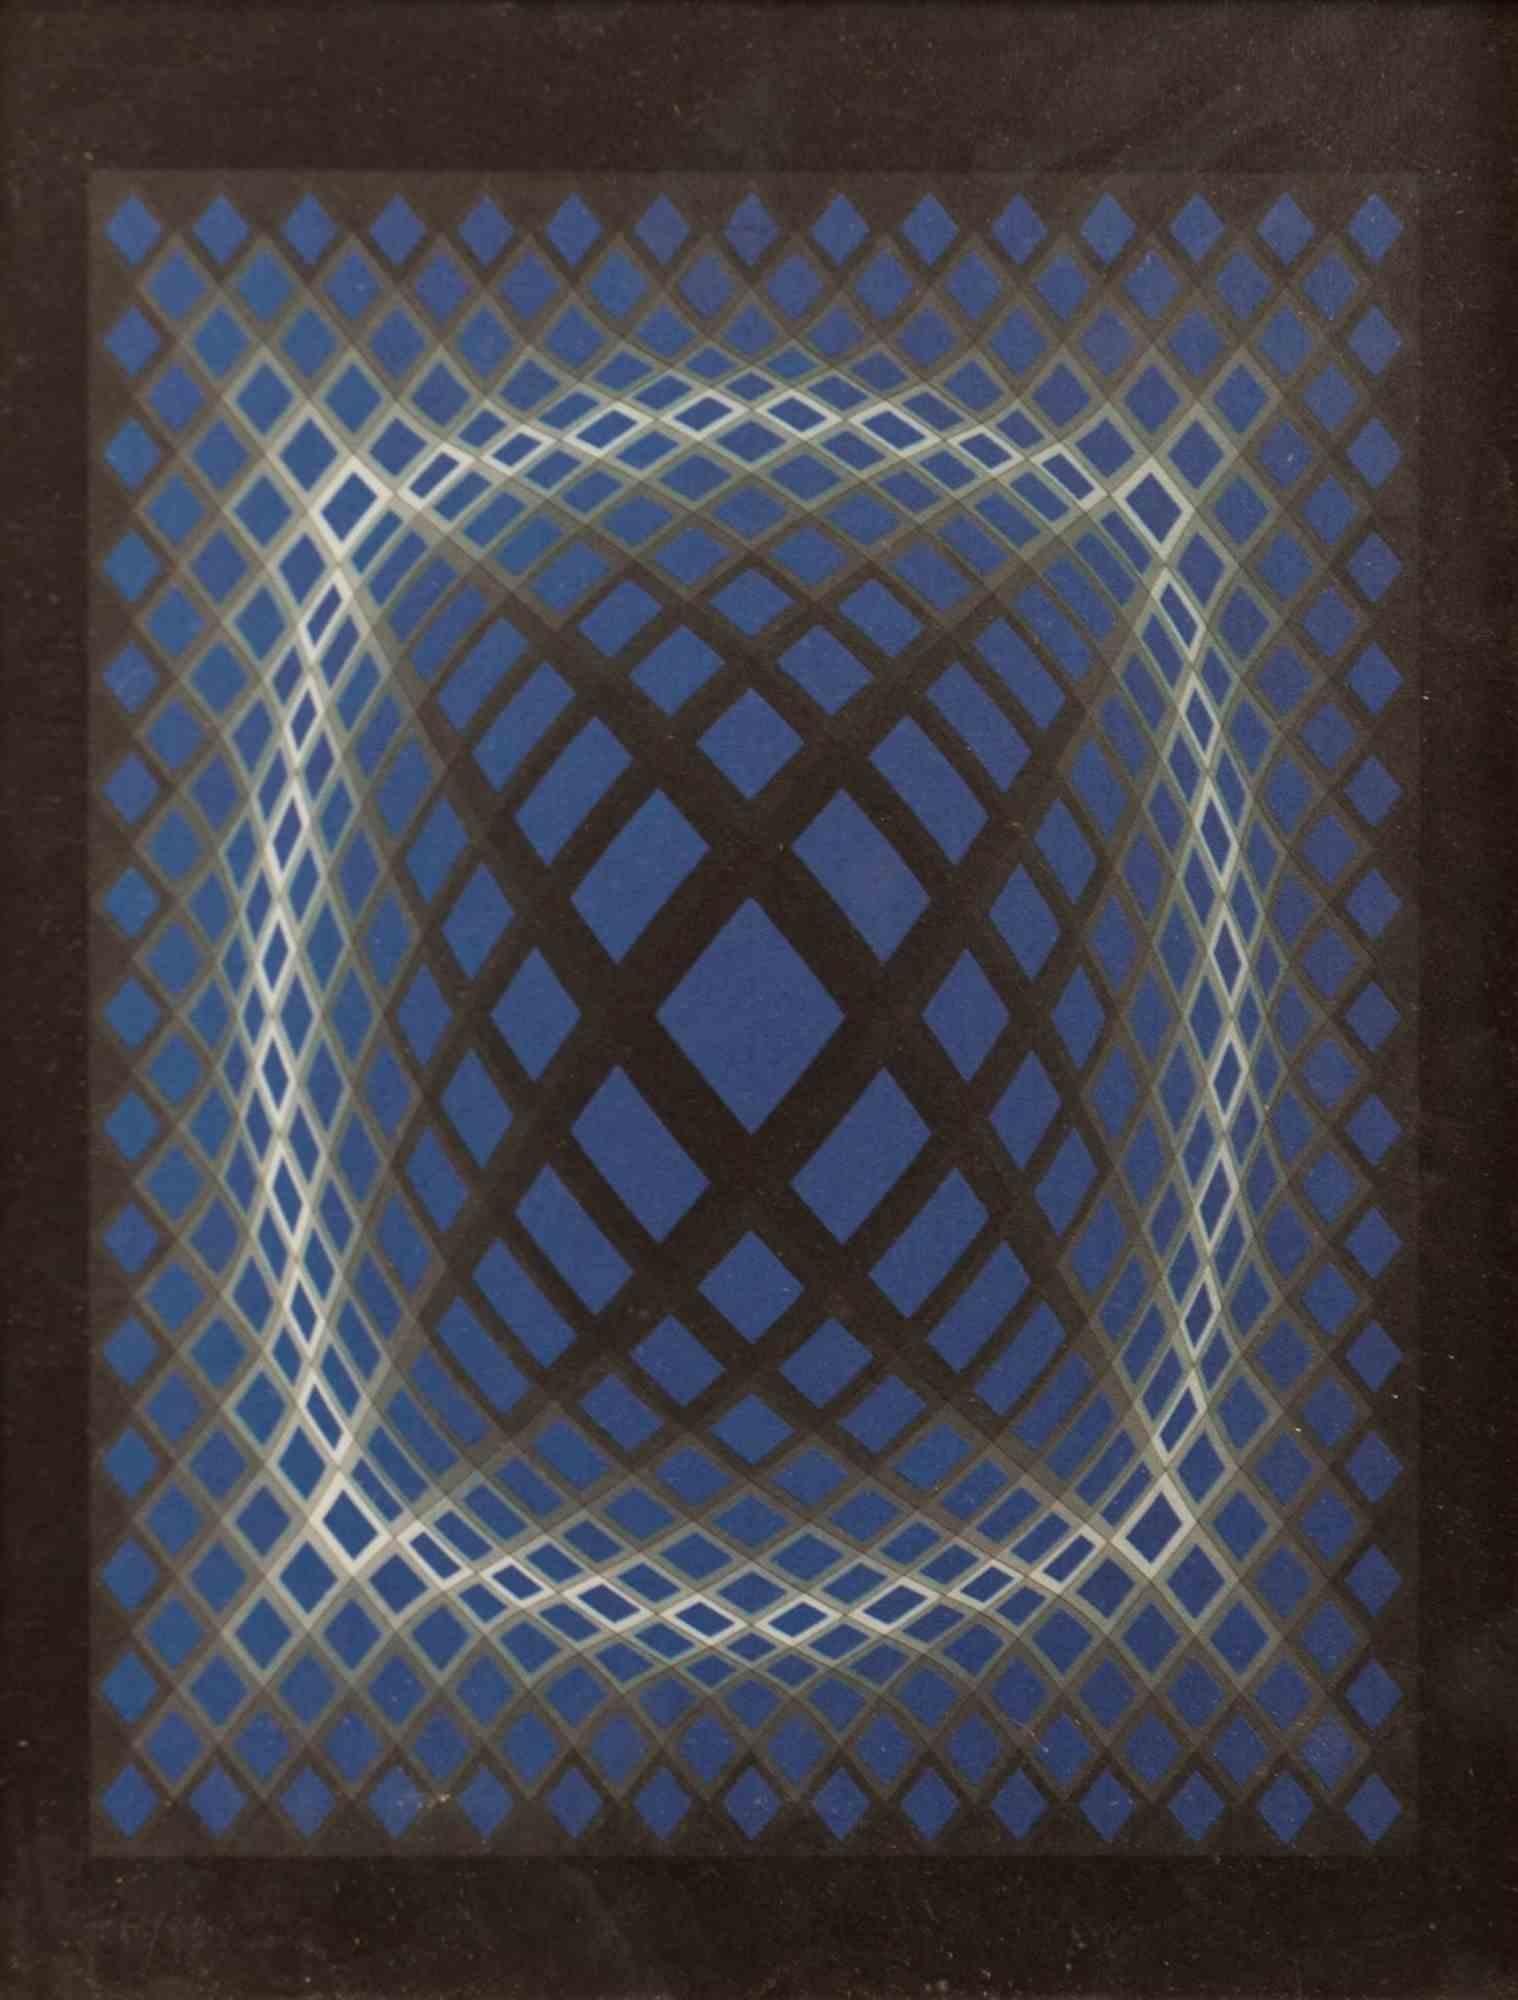 Victor Vasarely Abstract Print - Lattice - Screen Print by V. Vasarely - 1980s